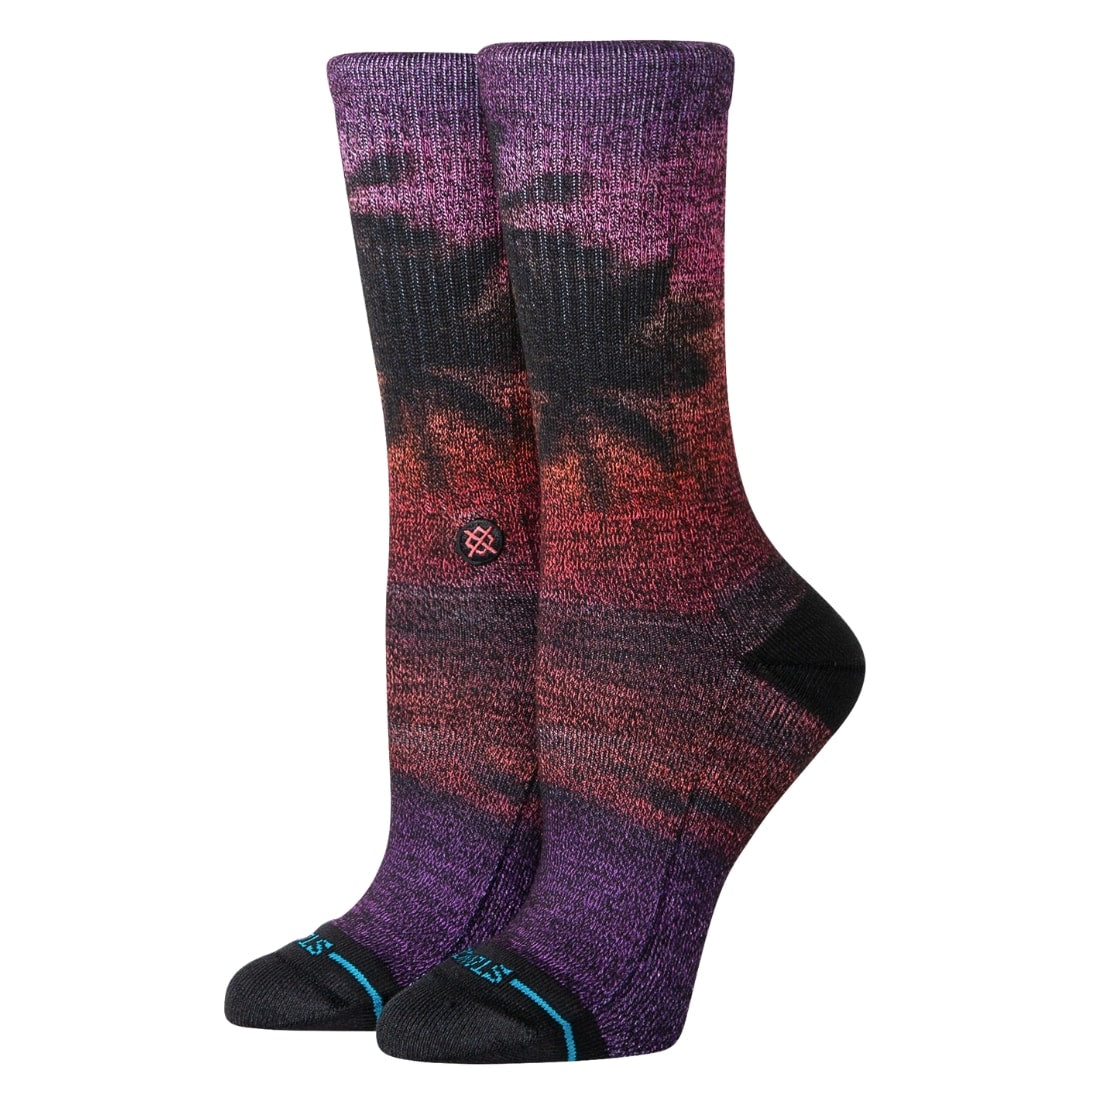 Stance Womens Vacay Mode Socks - Floral - Womens Crew Length Socks by Stance M (UK6-8.5)